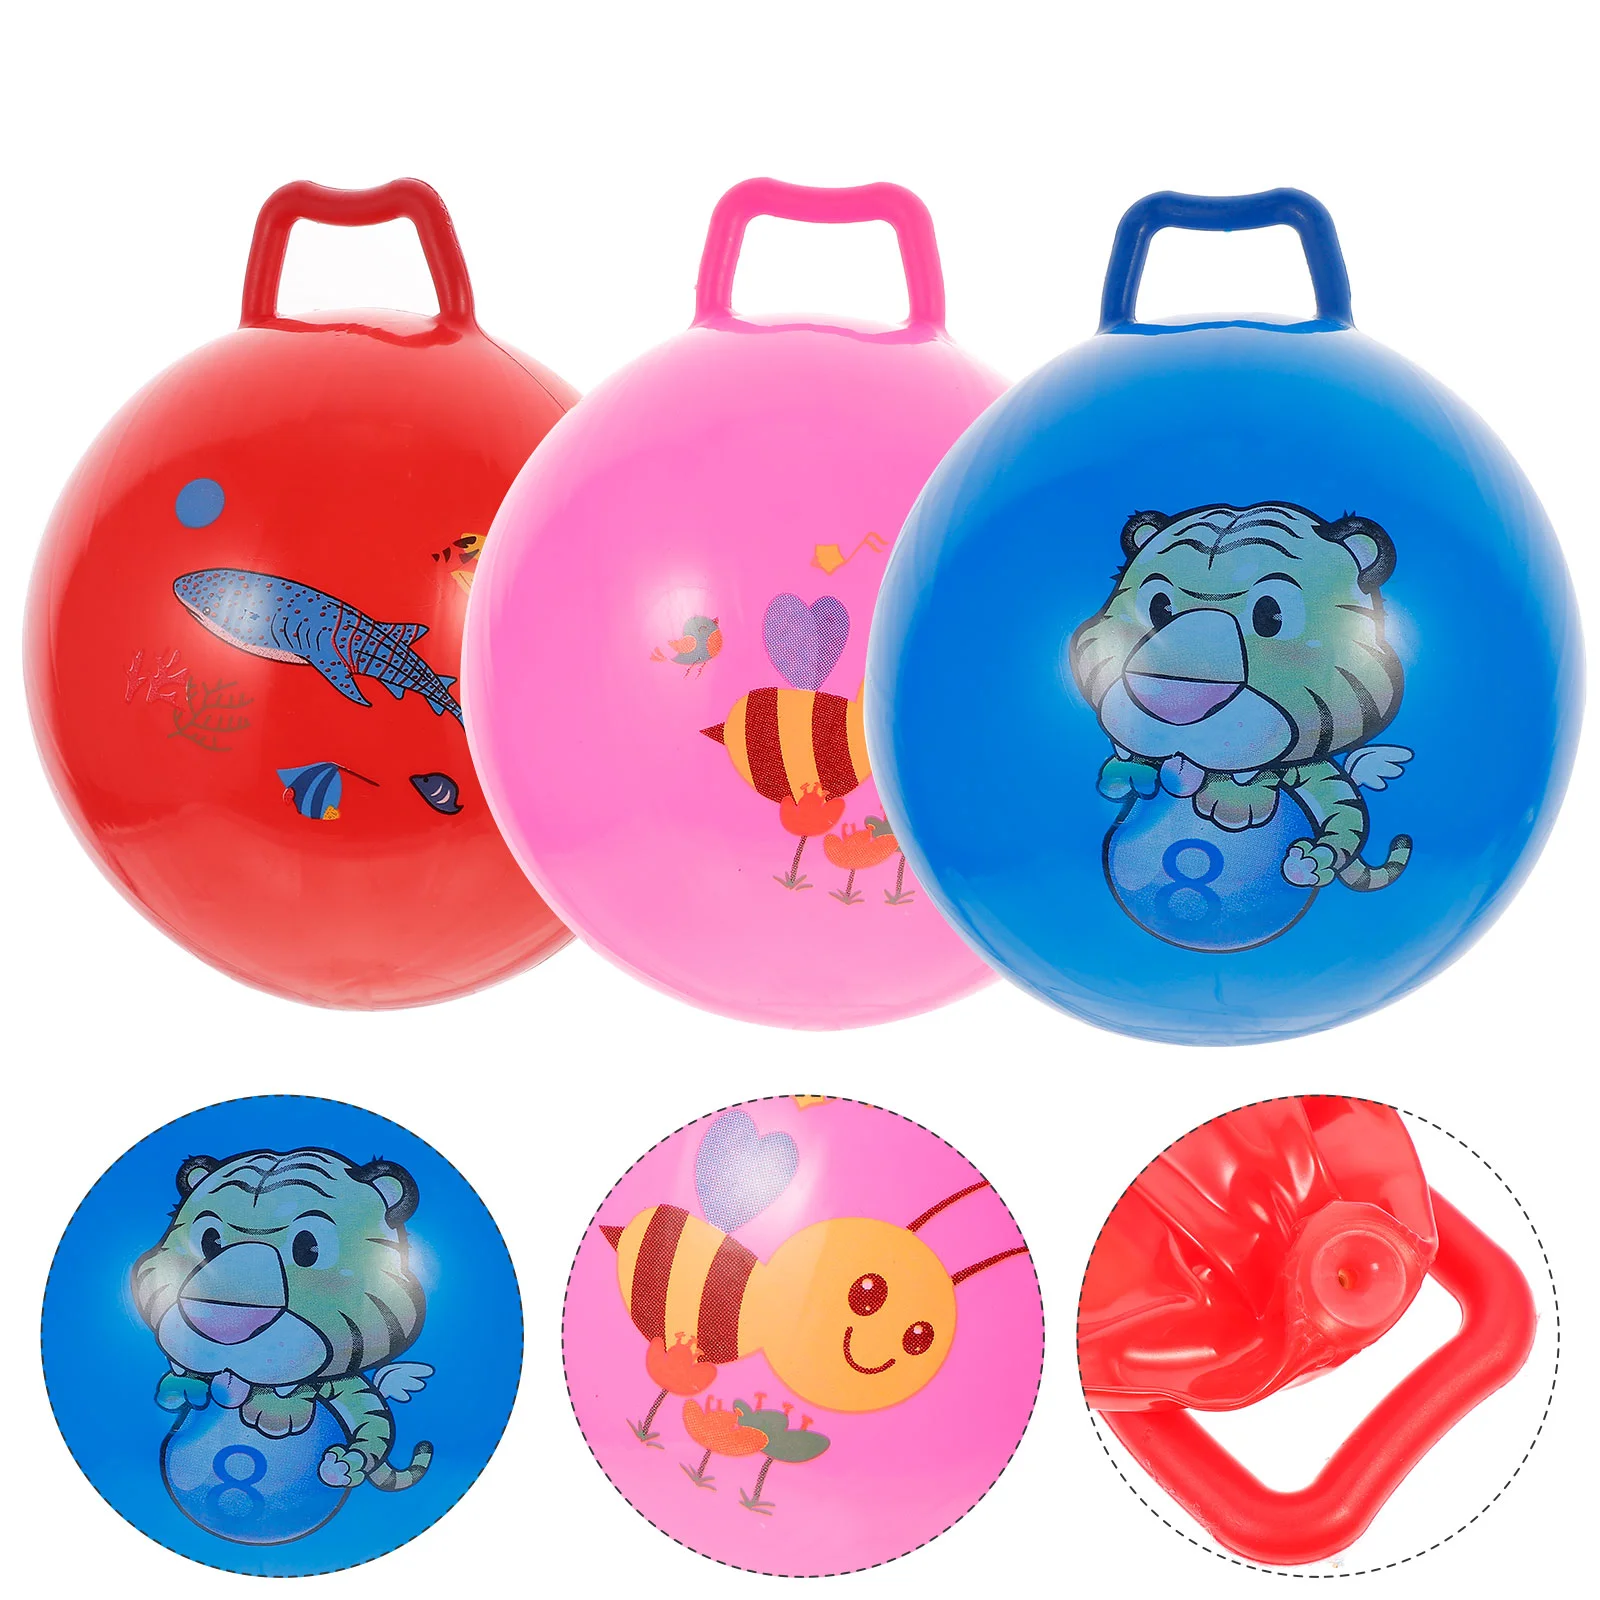 3 Pcs Ball Inflatable Toy Jumping with Handle Kids Educational Toys Aldult - £11.01 GBP